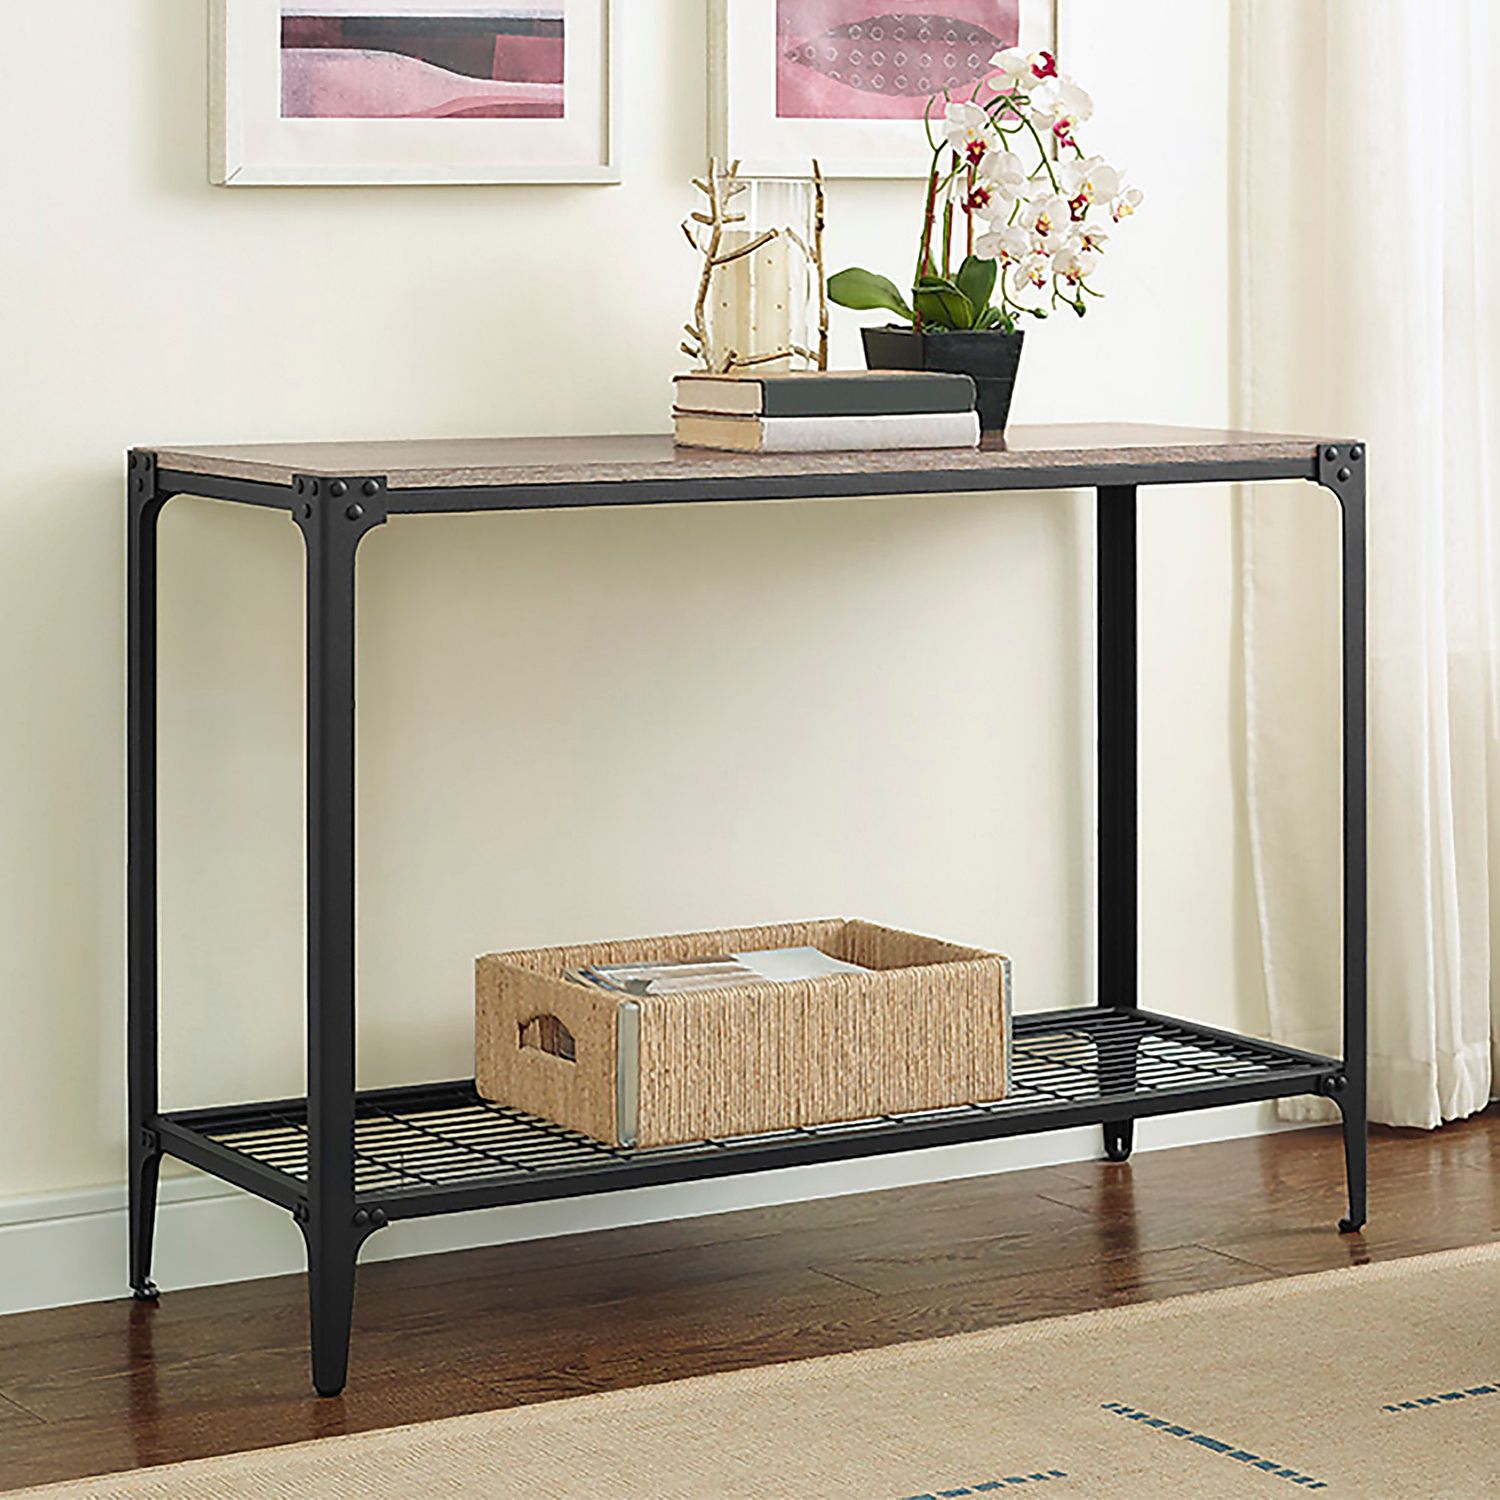 Angle Iron Rustic Console Table – Pier1 Imports For Metal Console Tables (View 4 of 20)